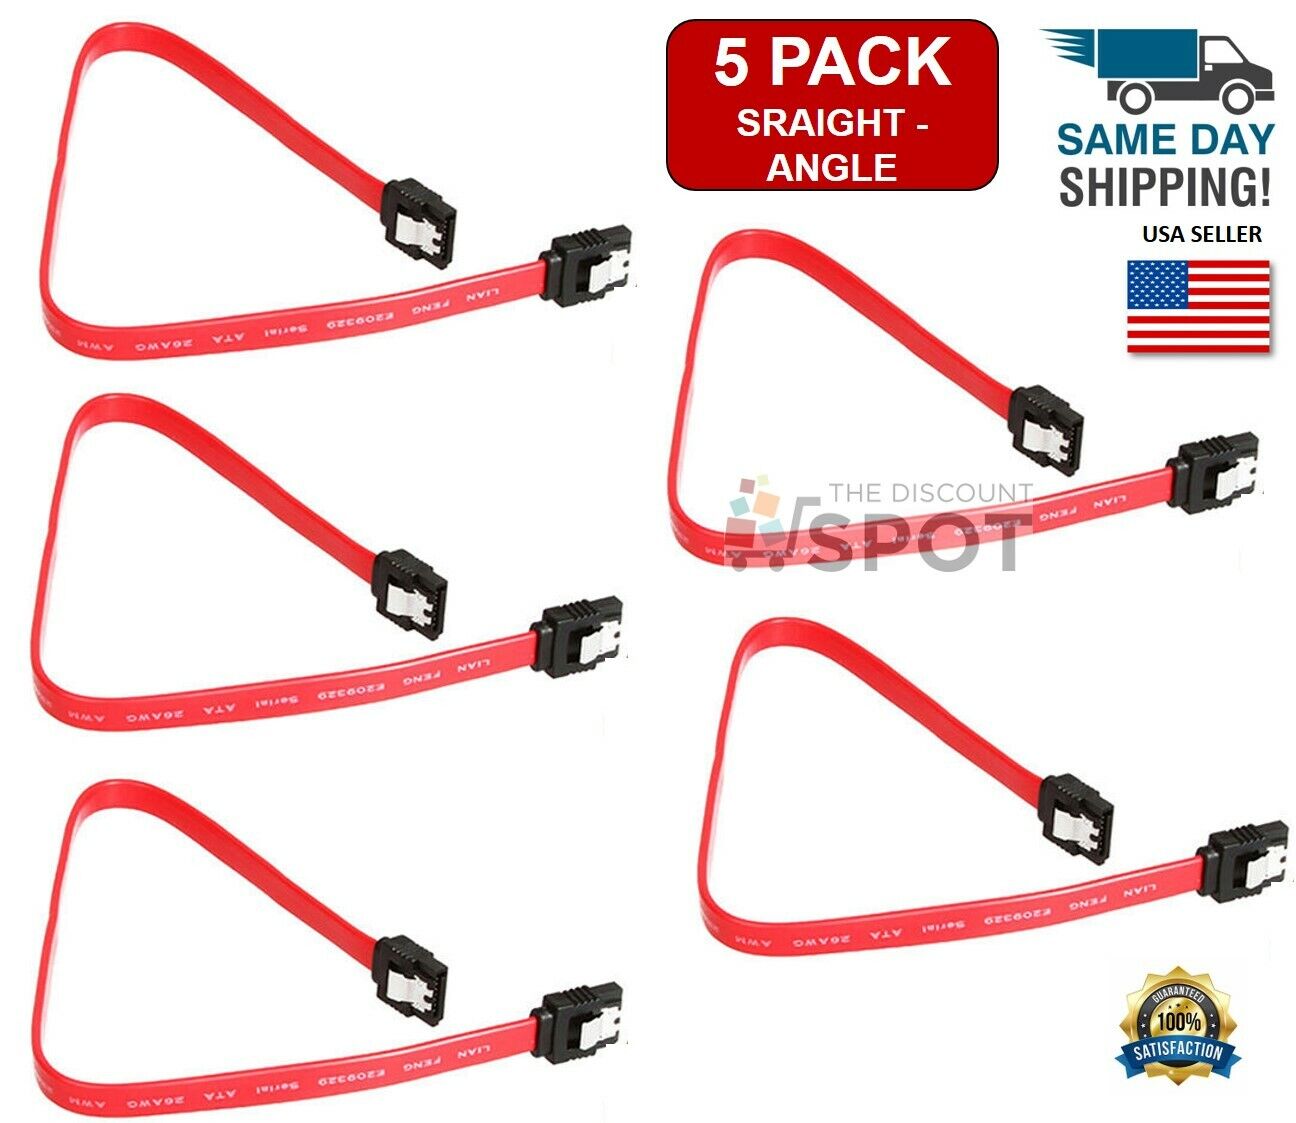 5-Pack 18” SATA III Cables Straight to Straight Angle SSD HDD Hard Drive Red